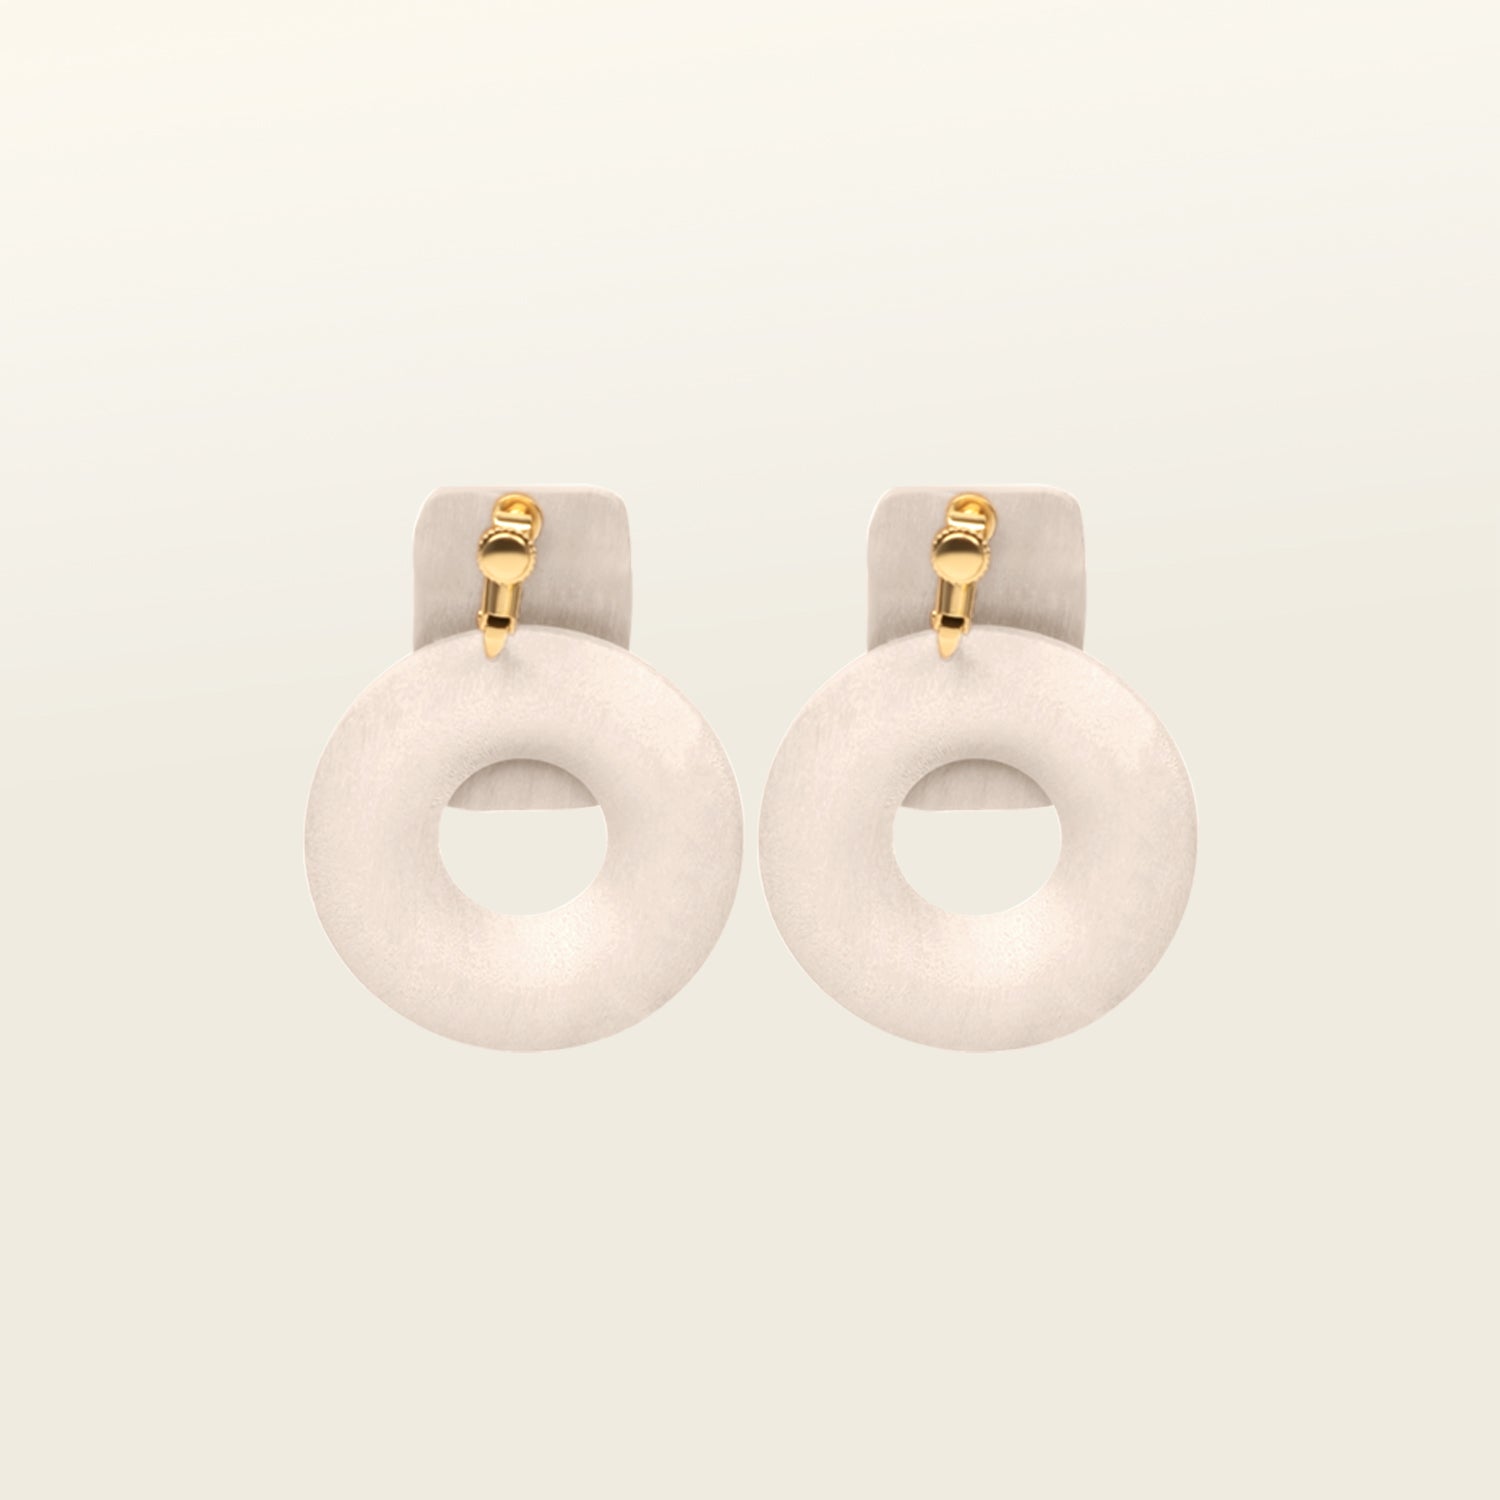 Image of the Sand Dune Clip On Earrings provide a secure hold for 8-12 hours, with the ability to adjust to any ear size. Crafted with copper alloy and wood, one pair is included. The screwback clip-on design is ideal for thick/large, sensitive, small/thin, and stretched/healing ear types.